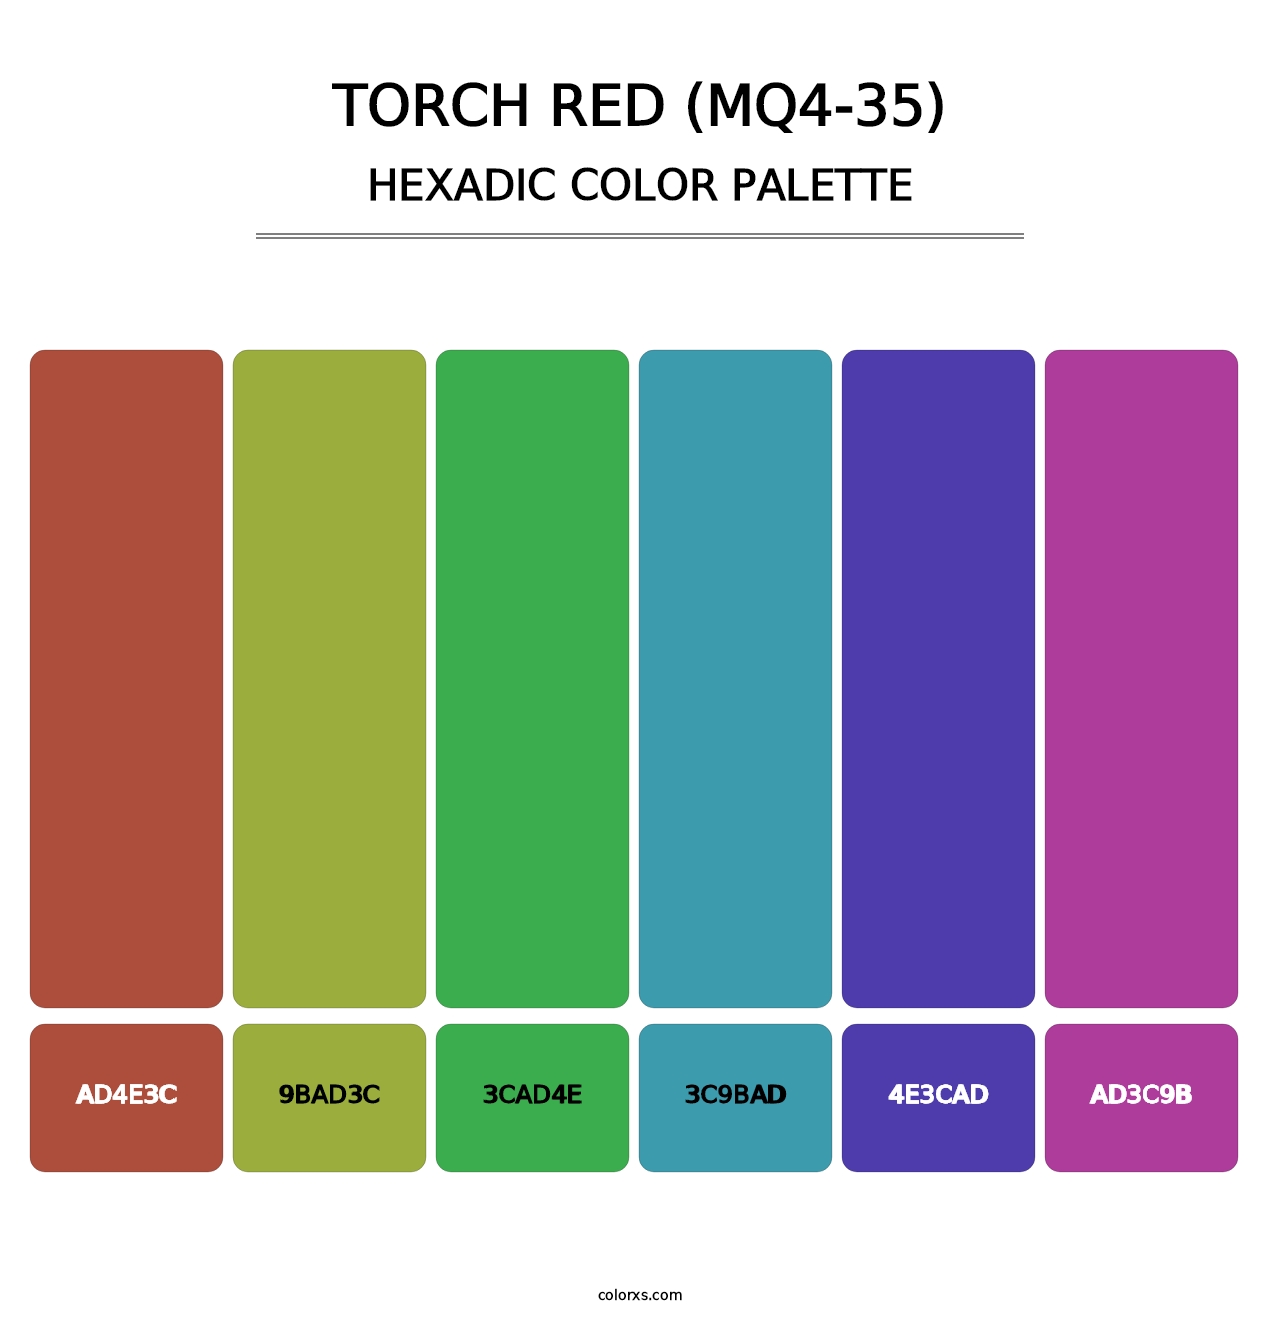 Torch Red (MQ4-35) - Hexadic Color Palette